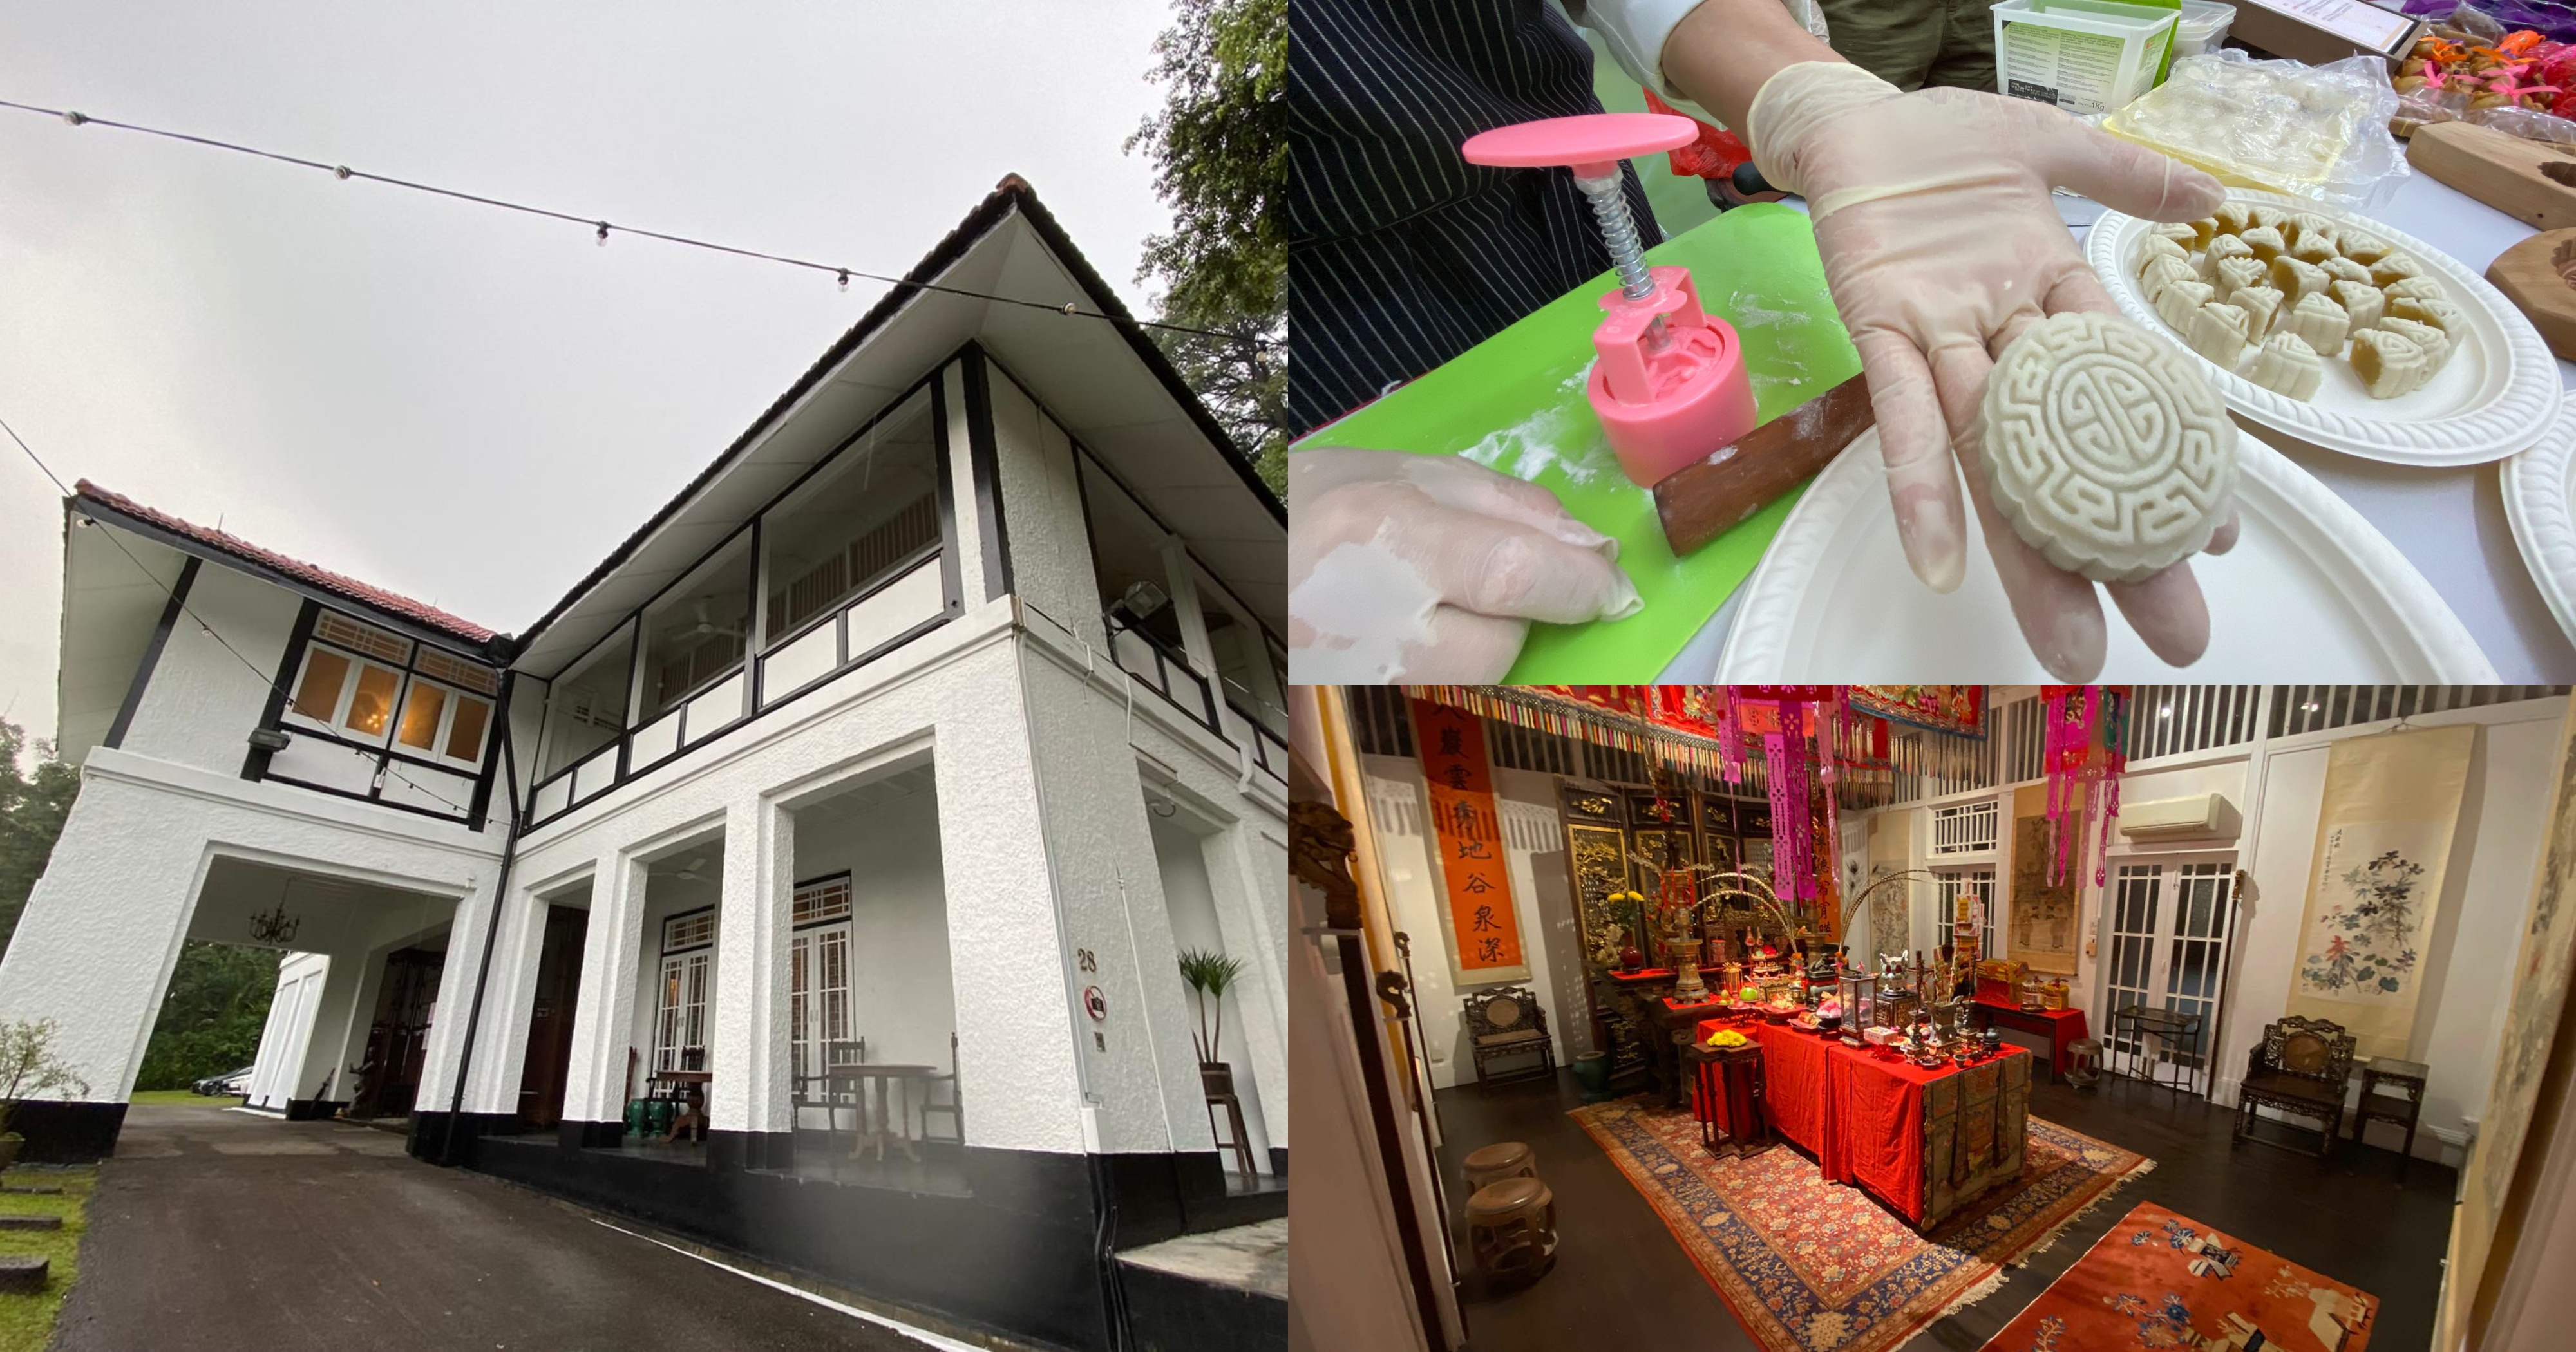 Free exhibitions, lantern-making workshop & more at S'pore colonial house on Sep. 11, 2022